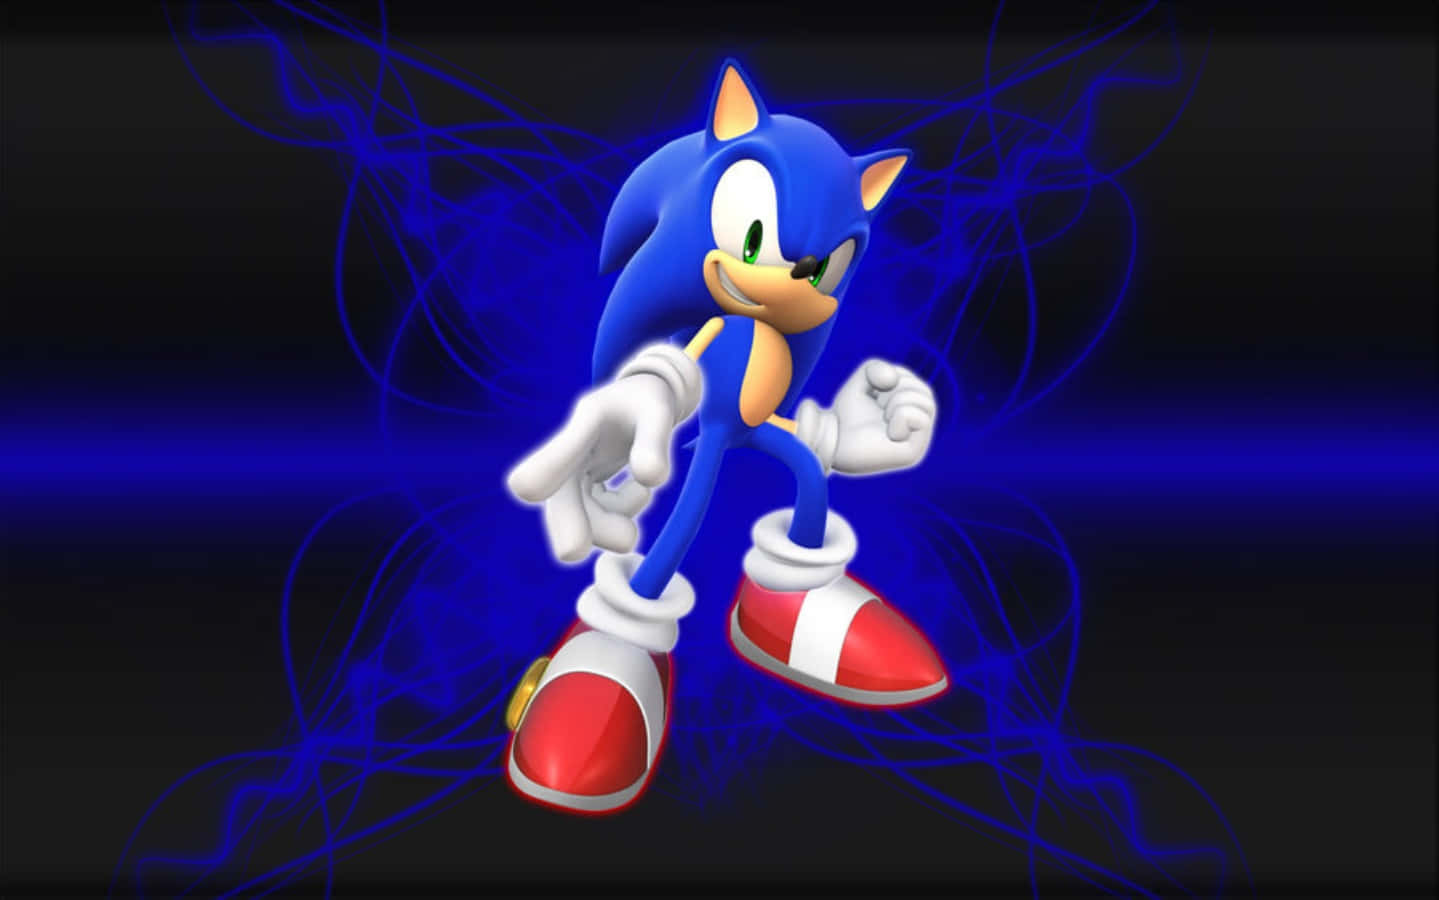 "Getting ready to explore a new level in the classic Sonic game!"